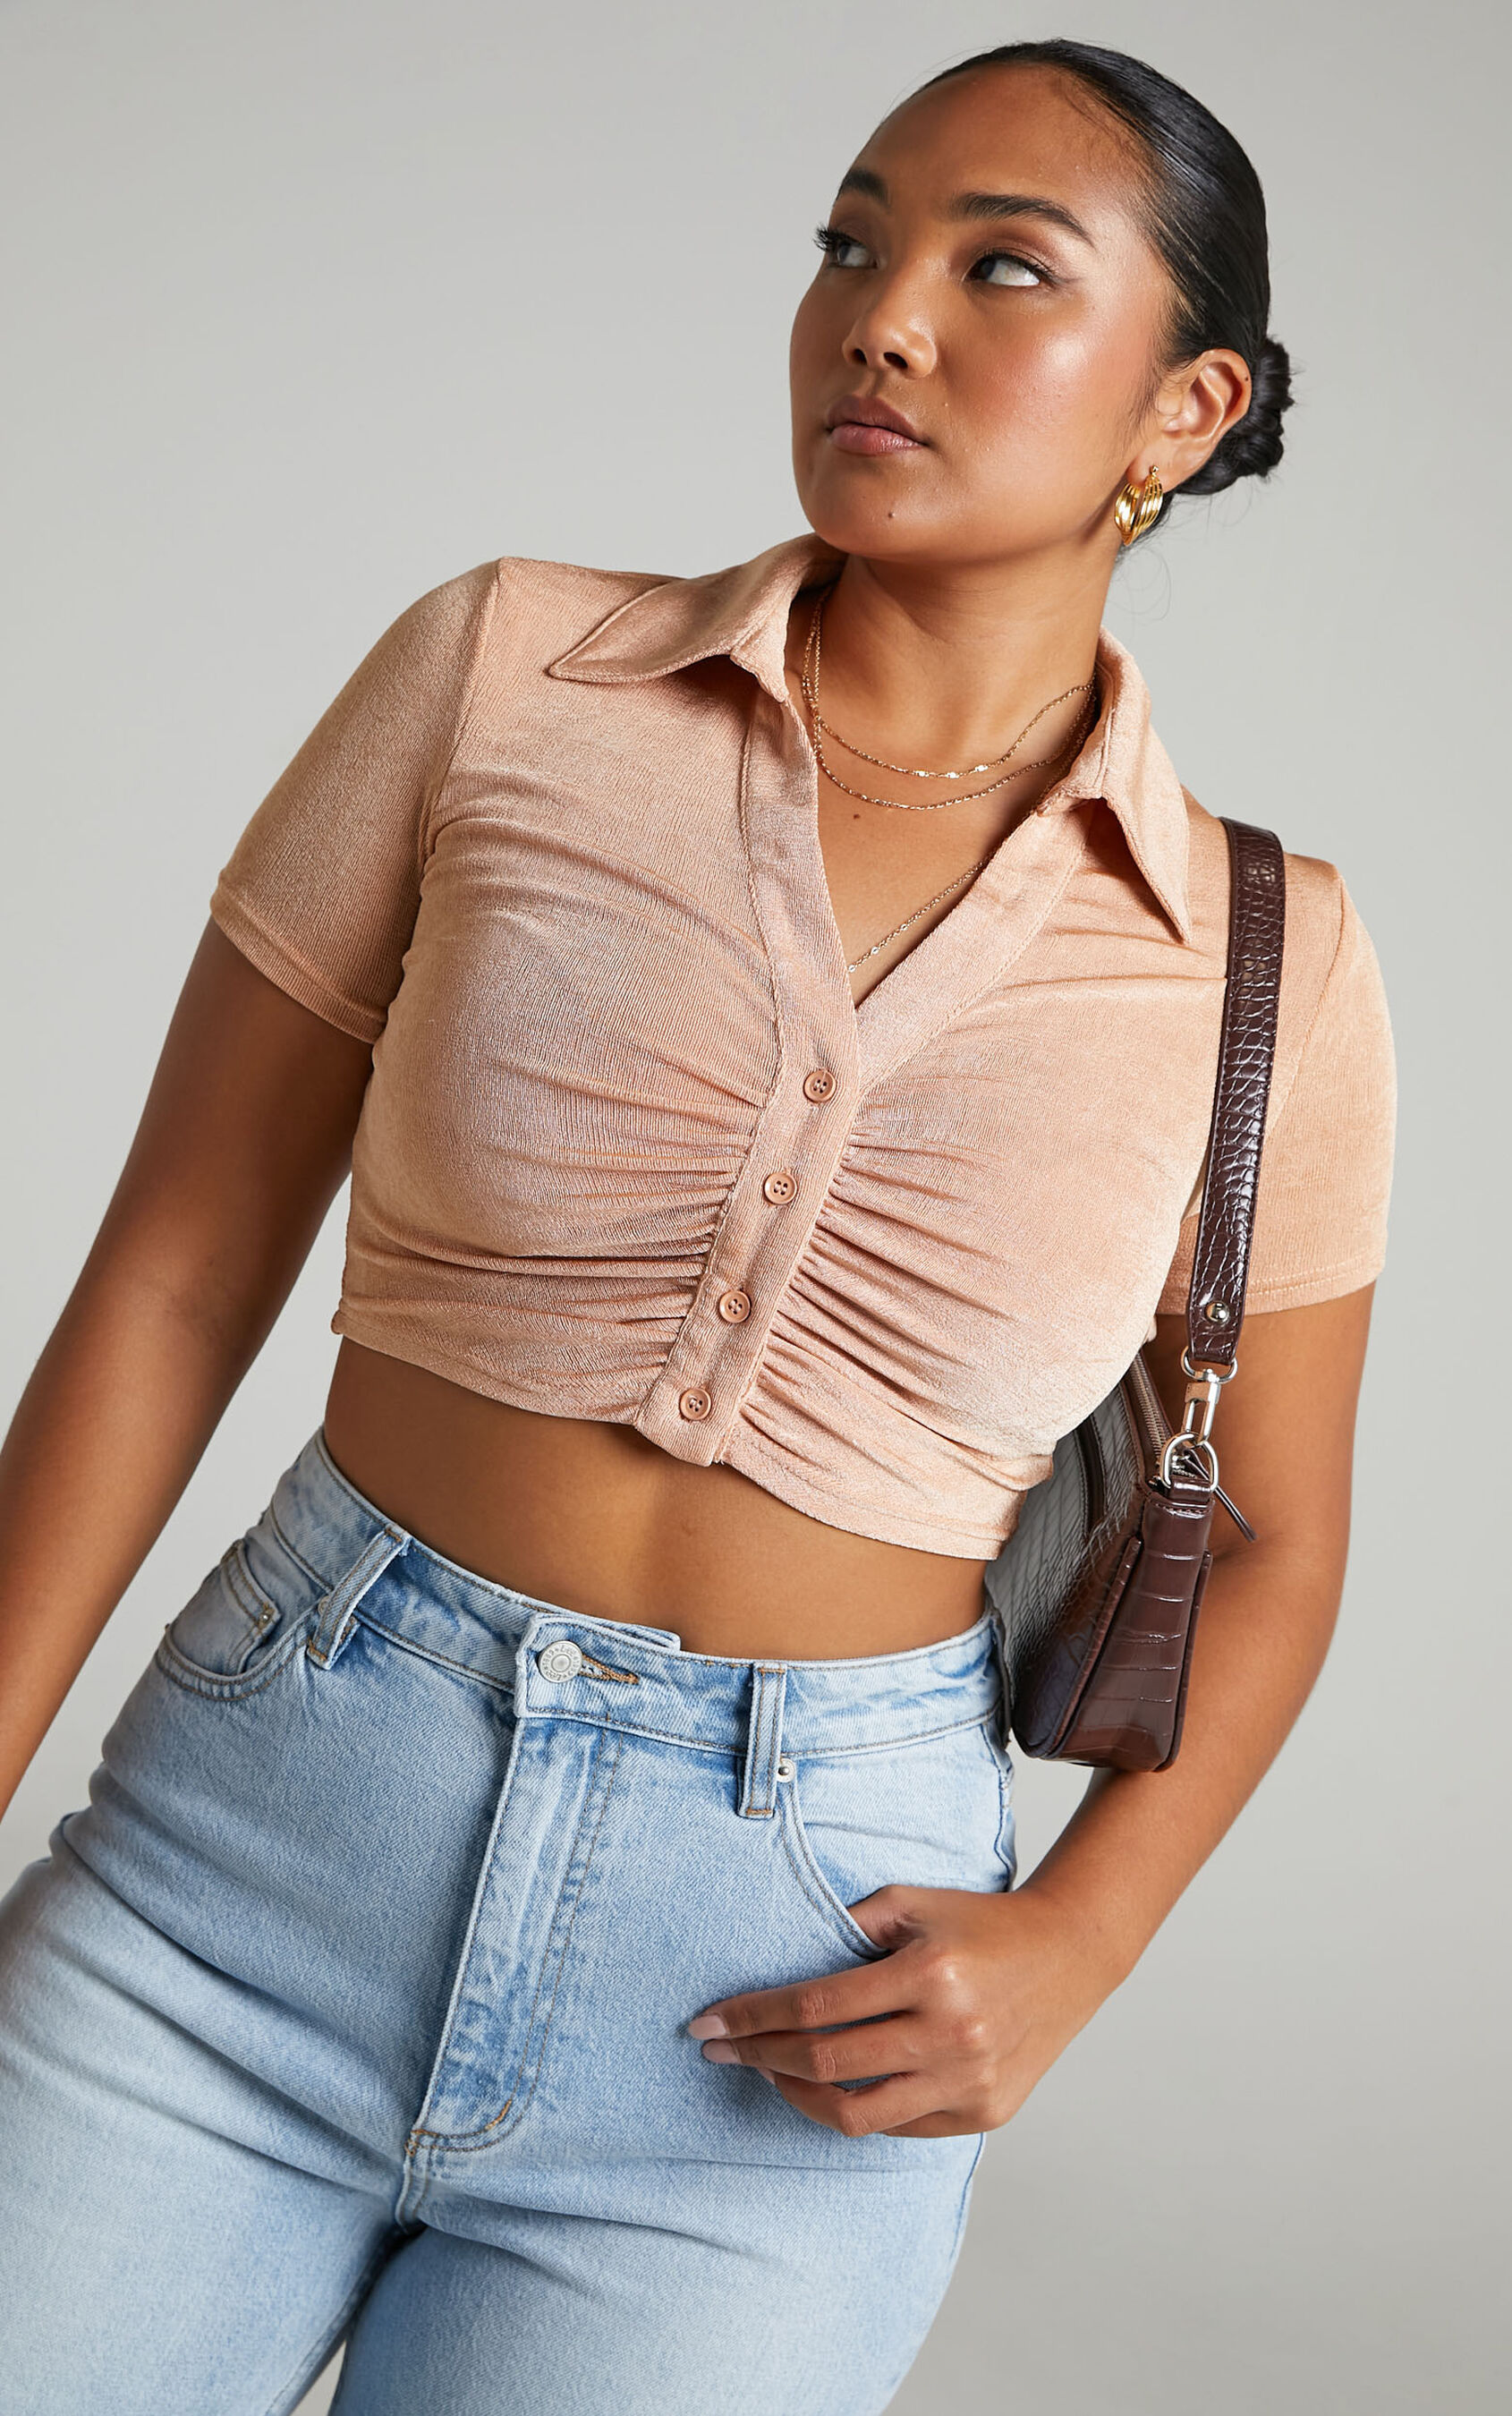 dolly-button-up-short-sleeve-crop-top-in-slinky-in-sand